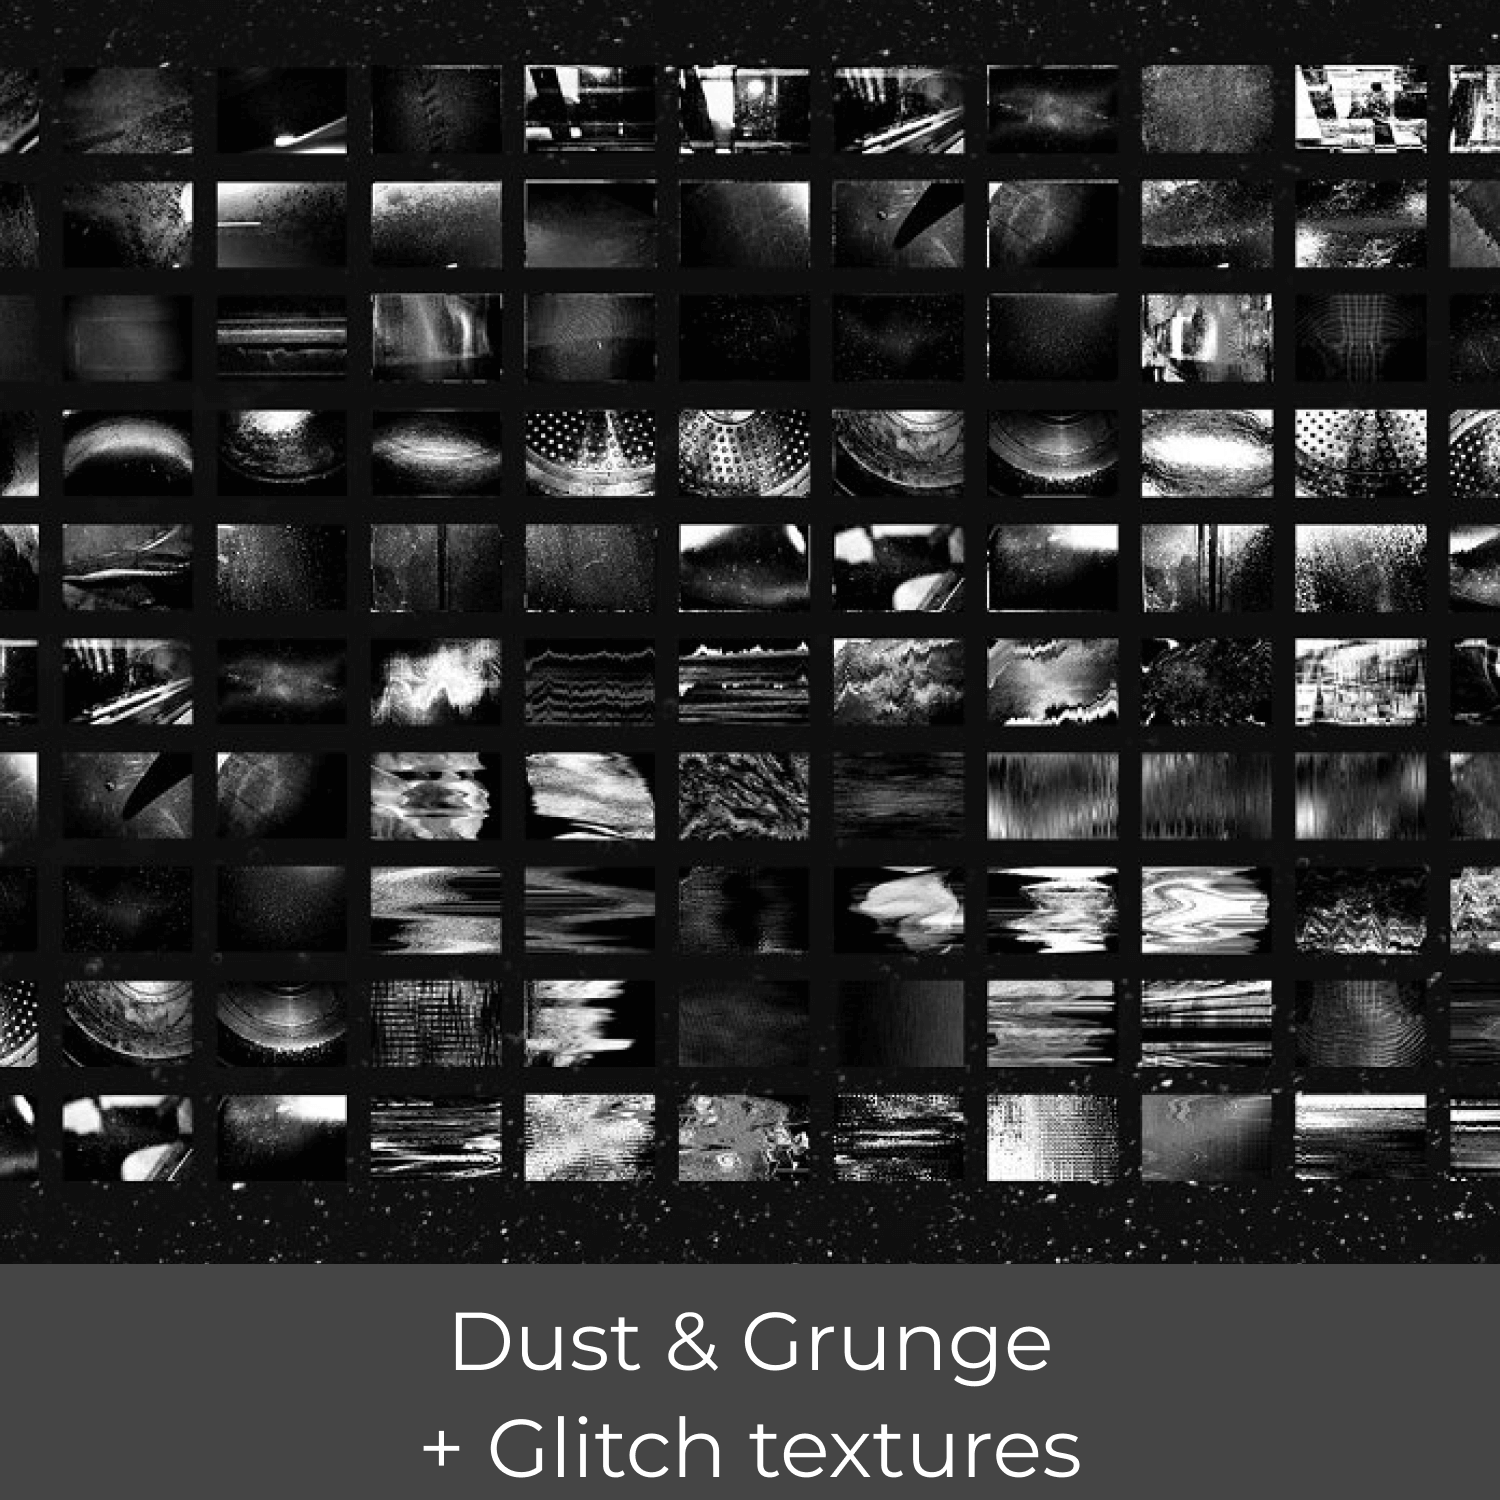 Dust and Grunge plus Glitch Textures.